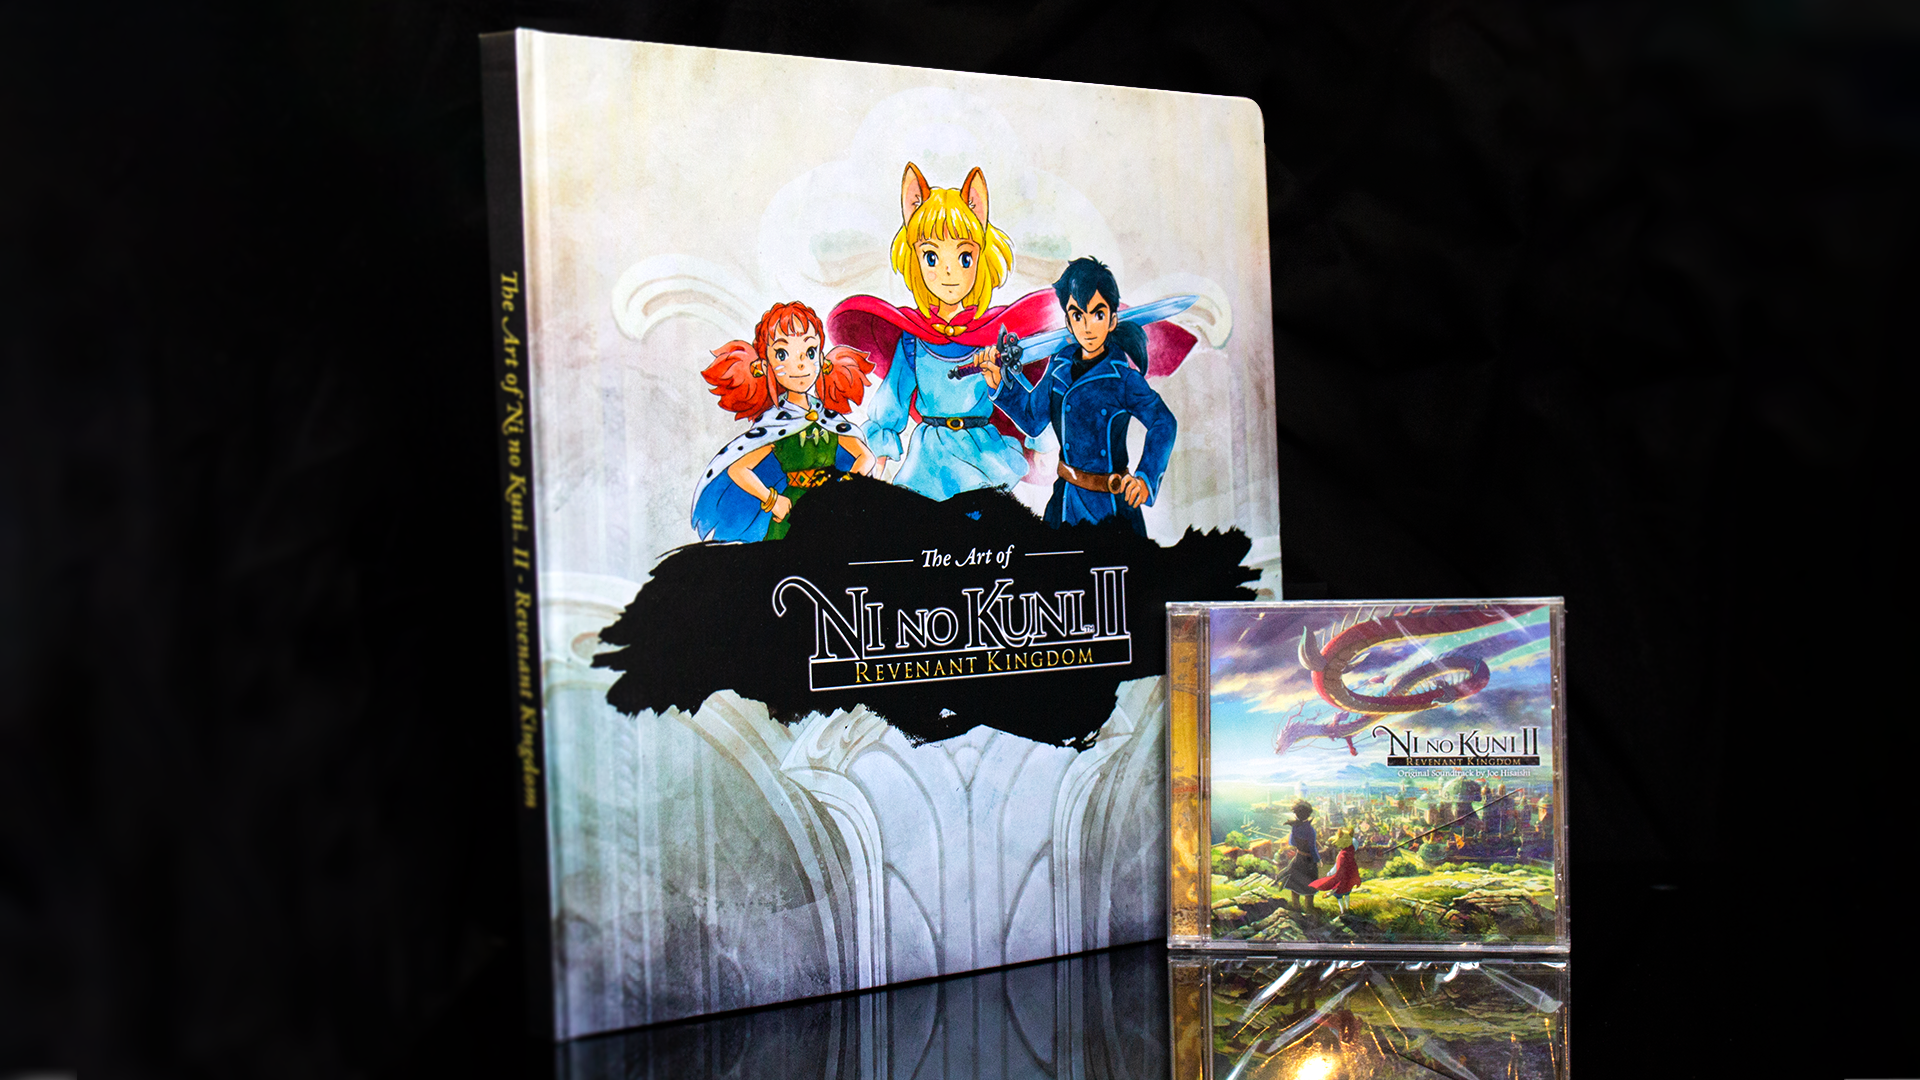 Win the Ni no Kuni II art book and the official soundtrack on CD